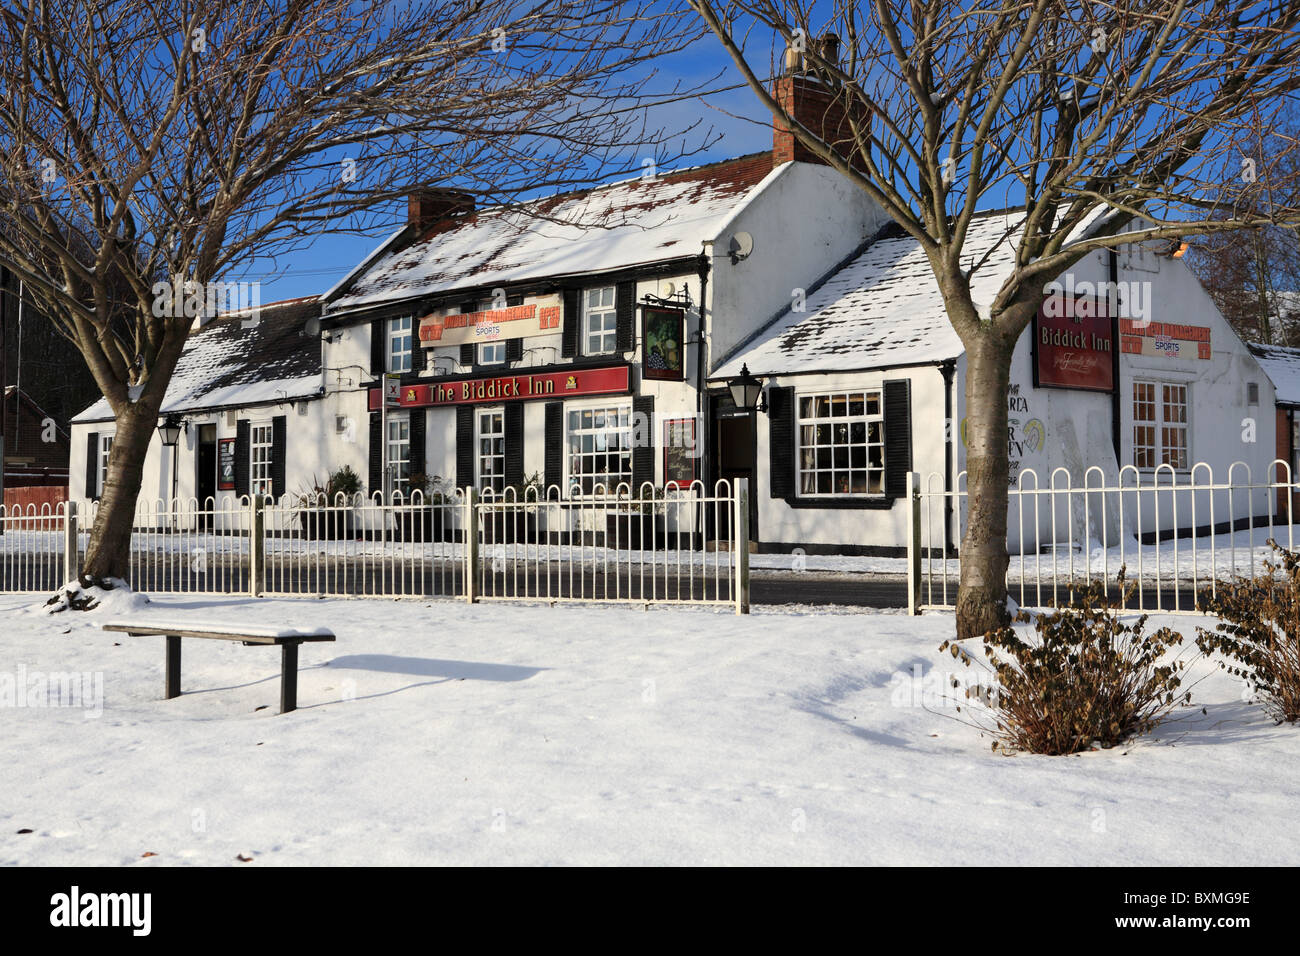 The Biddick Inn, a country pub, Washington, Tyne and Wear, England, seen in wintry conditions. Stock Photo